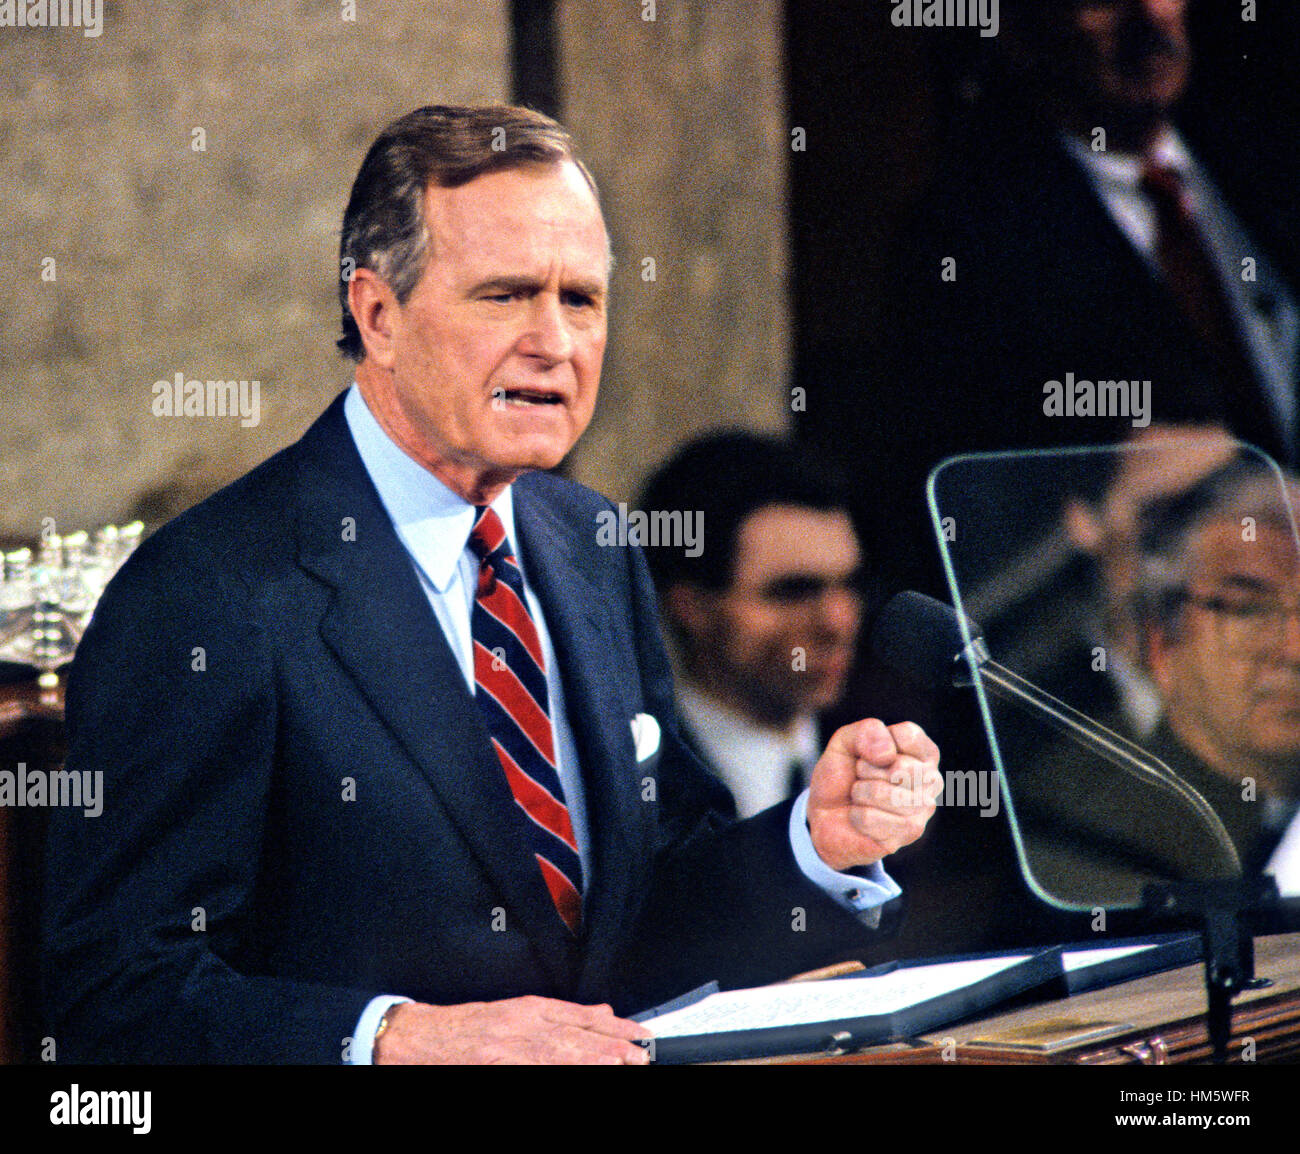 United States President George H.W. Bush delivers his State of the Union Address to a Joint Session of the 102nd U.S. Congress in the U.S. Capitol in Washington, D.C. on January 29, 1991. Stock Photo